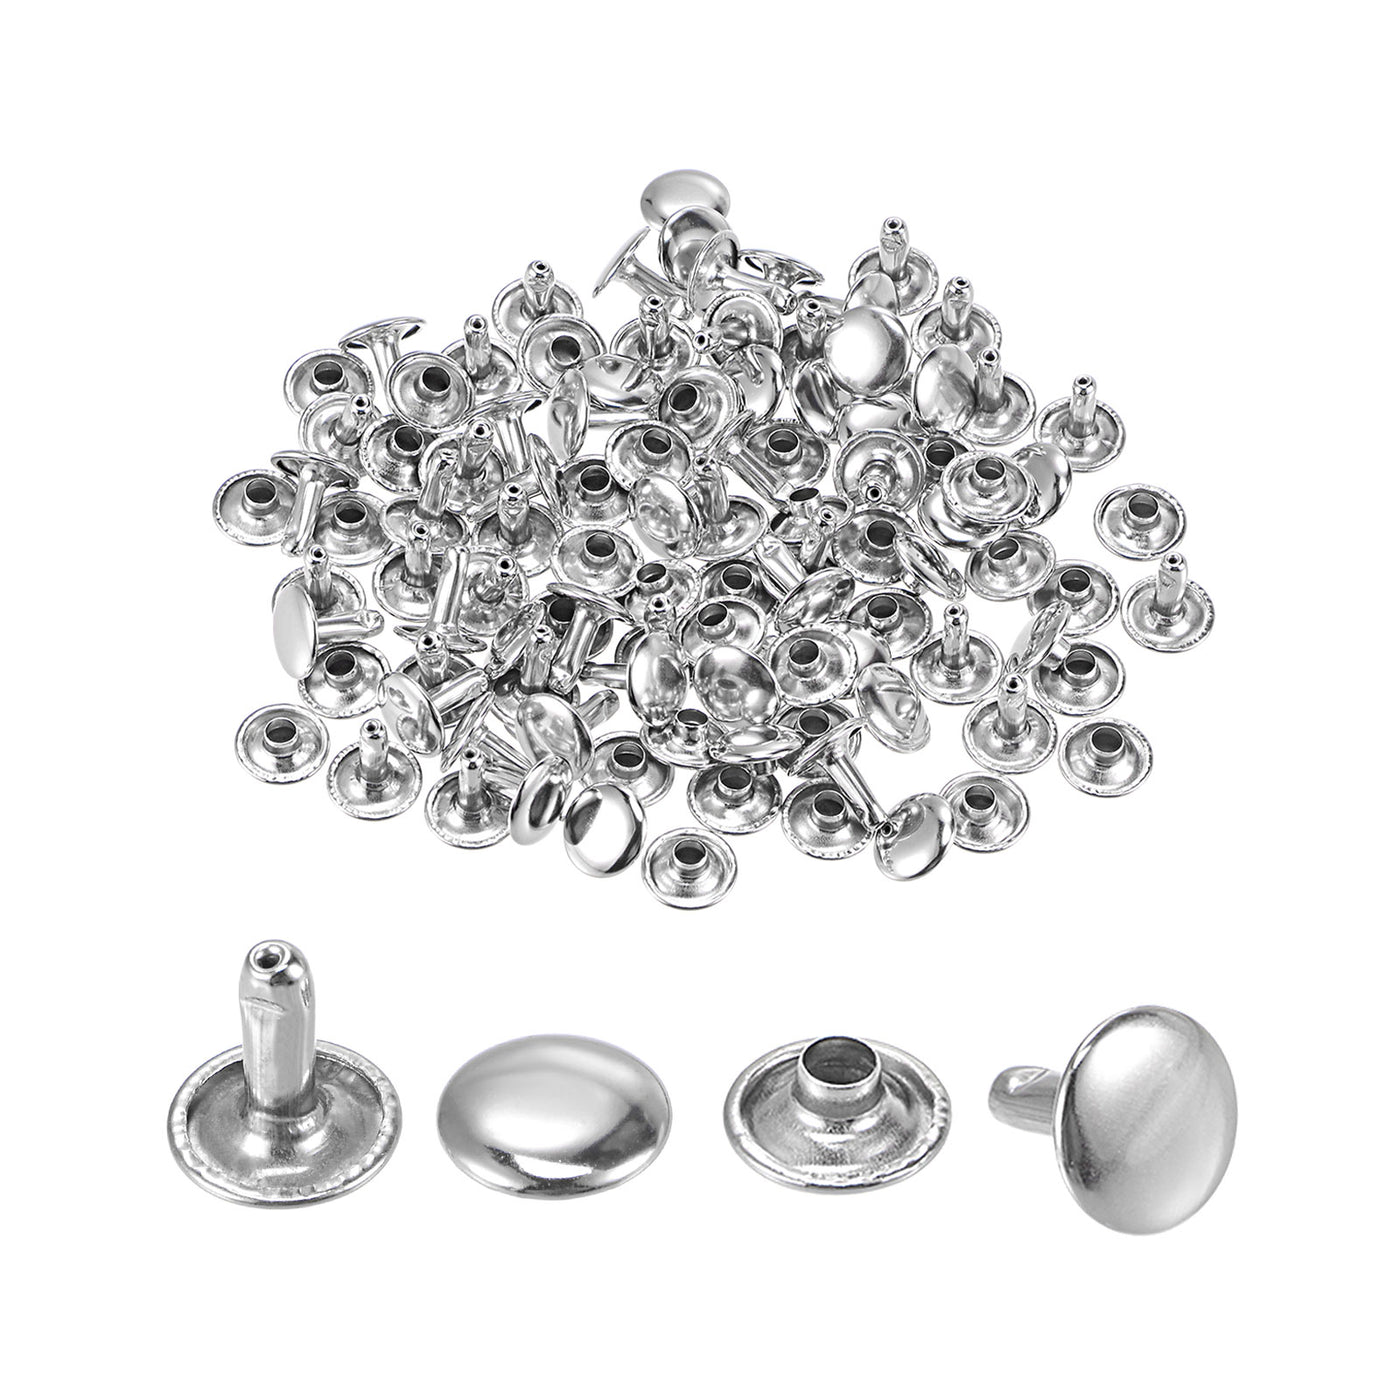 uxcell Uxcell 50 Sets Leather Rivets Silver Tone 10mm Double Cap Brass Rivet Leather Studs